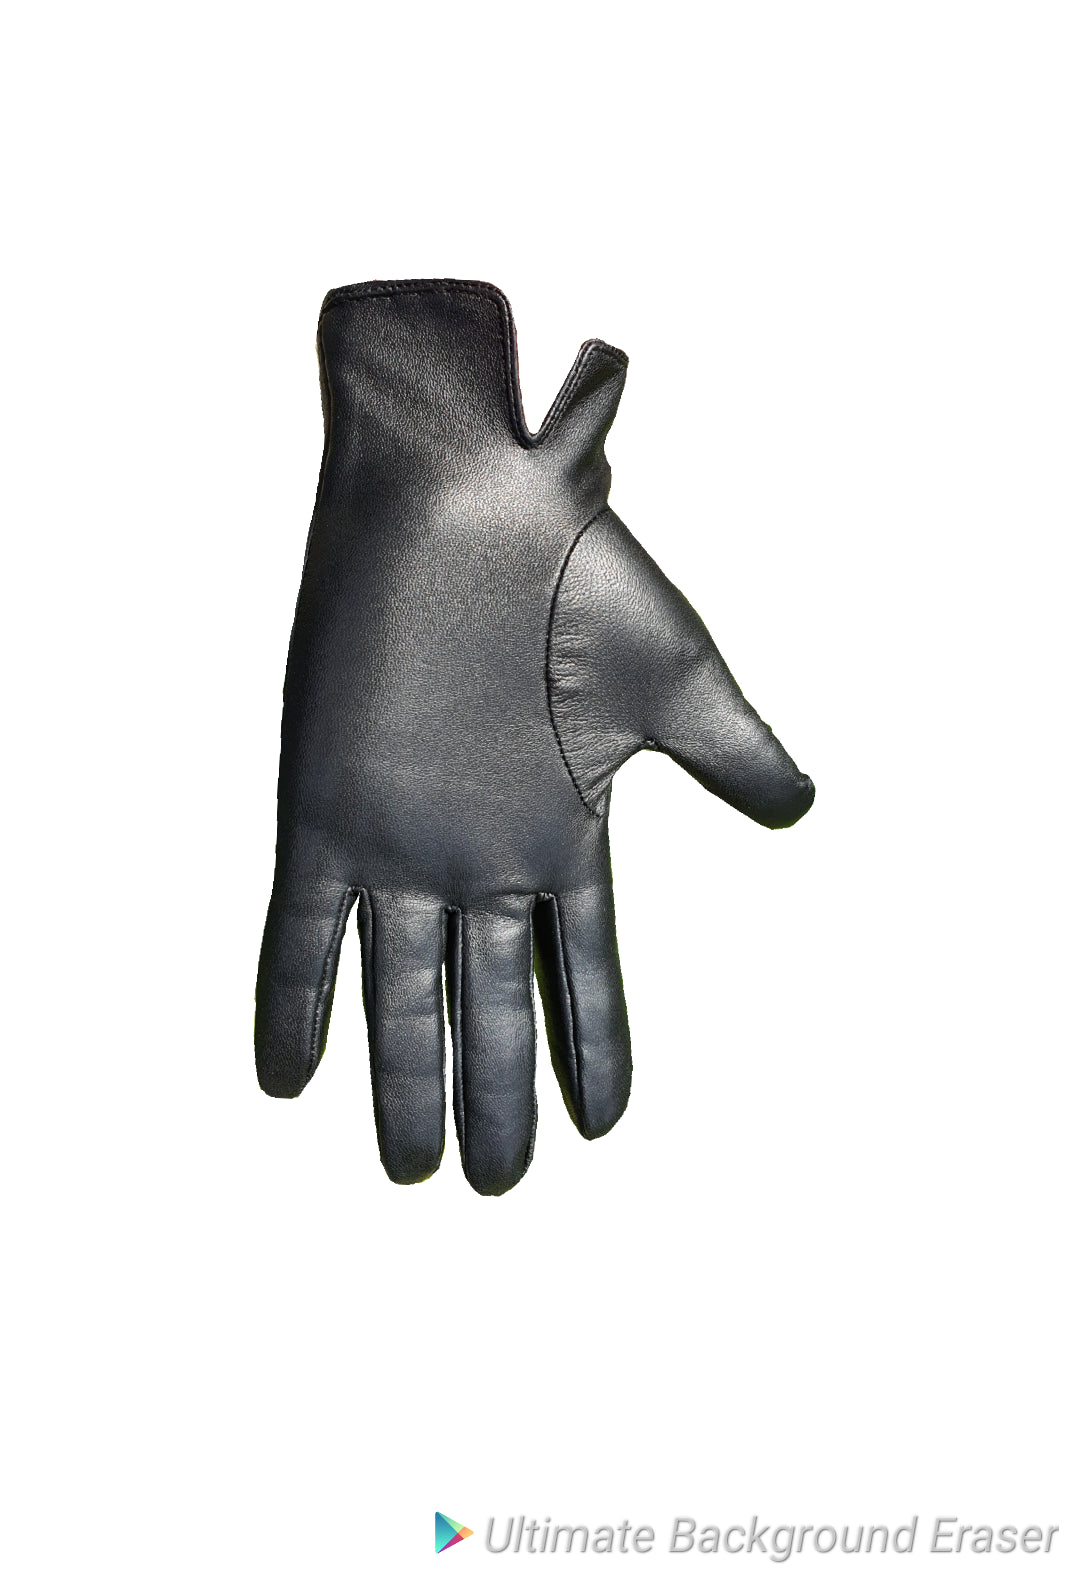 Hurlford Black Xlarge Leather Gloves - Show and Equestrian Riding - Foxwood Equestrian